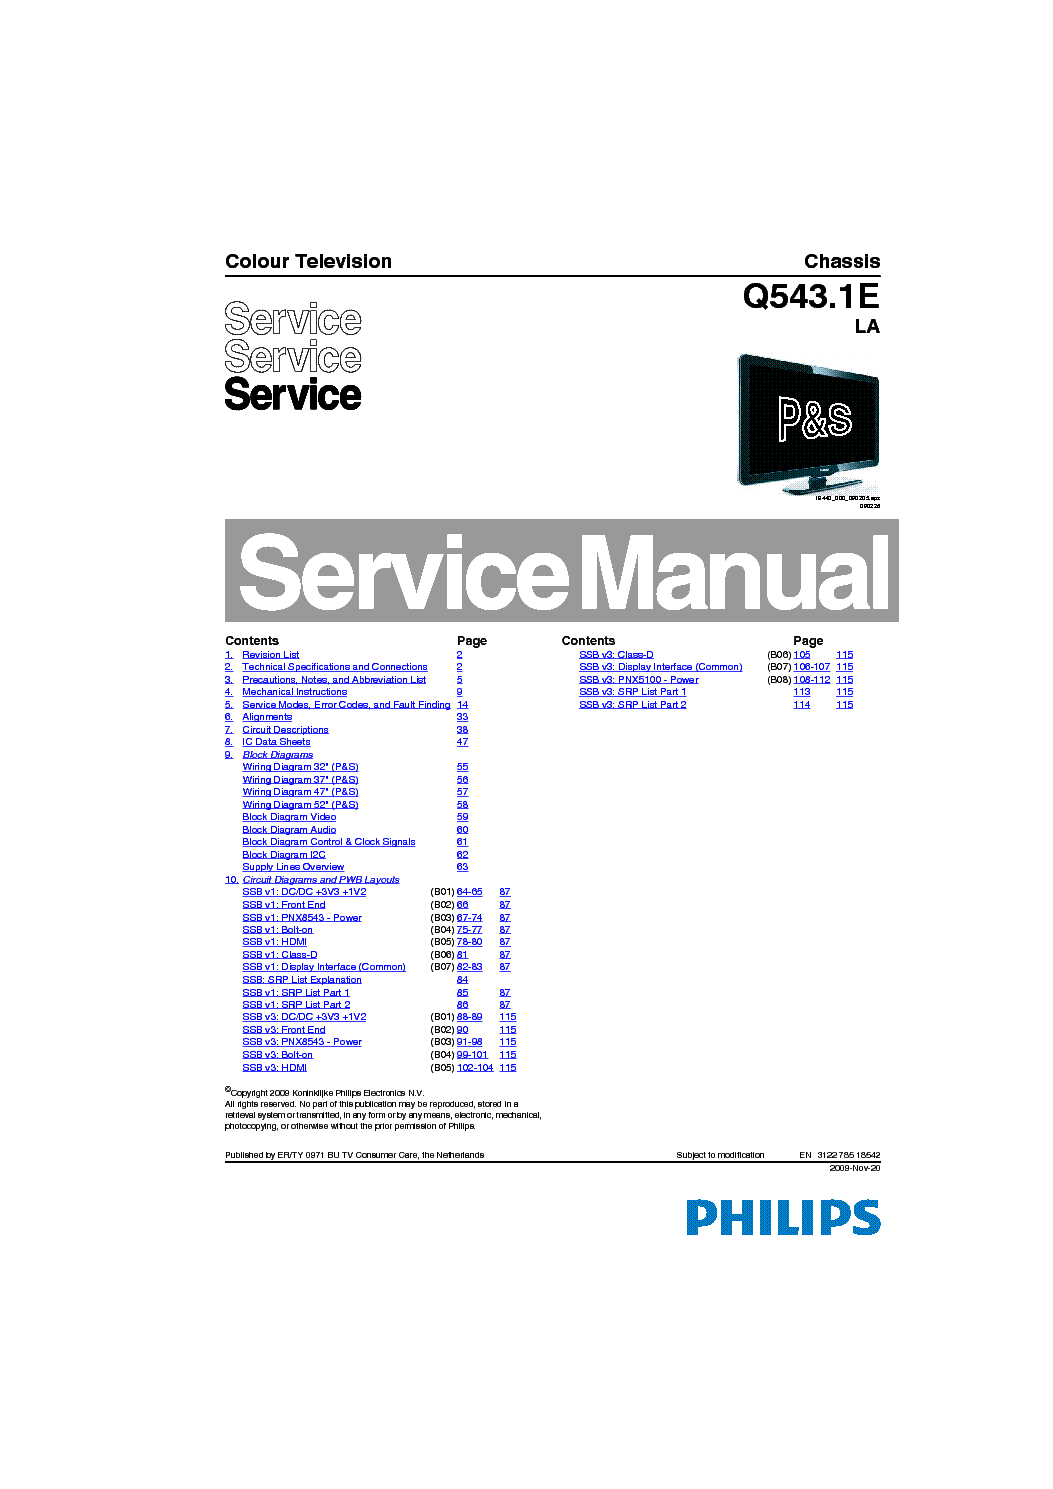 PHILIPS Q543.1ELA 312278518542 service manual (1st page)